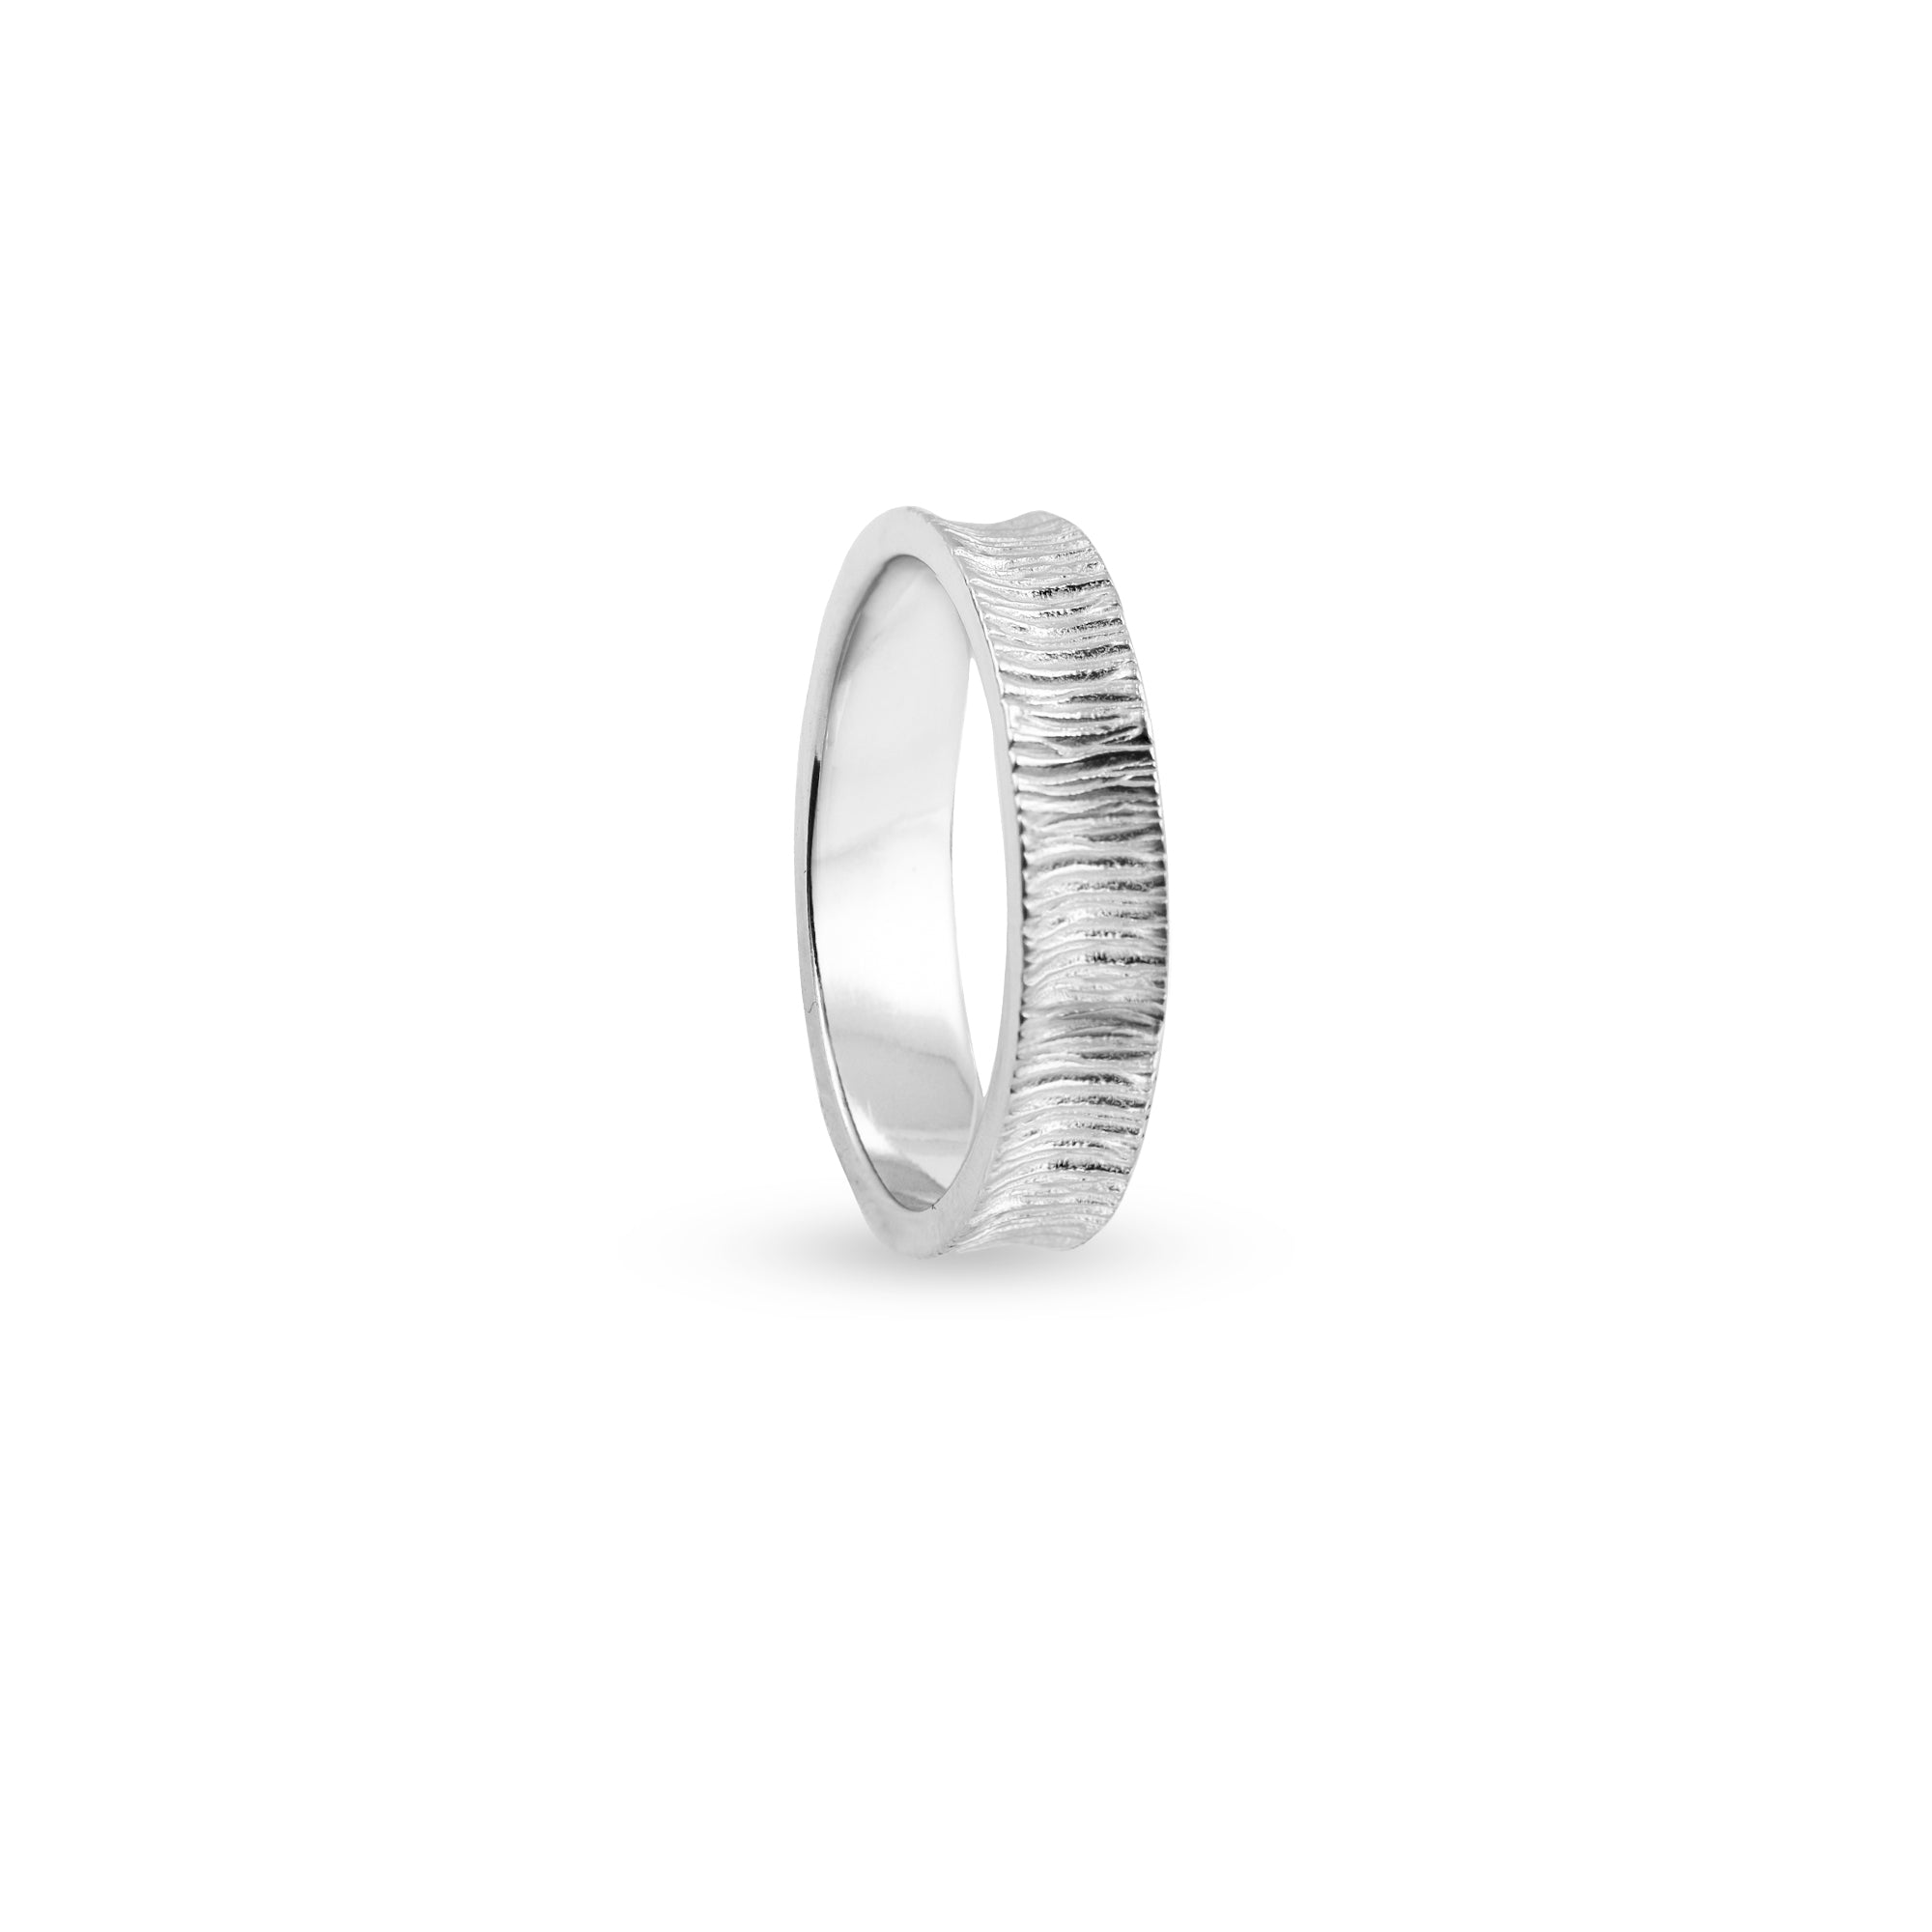 THE TEXTURED BAND RING